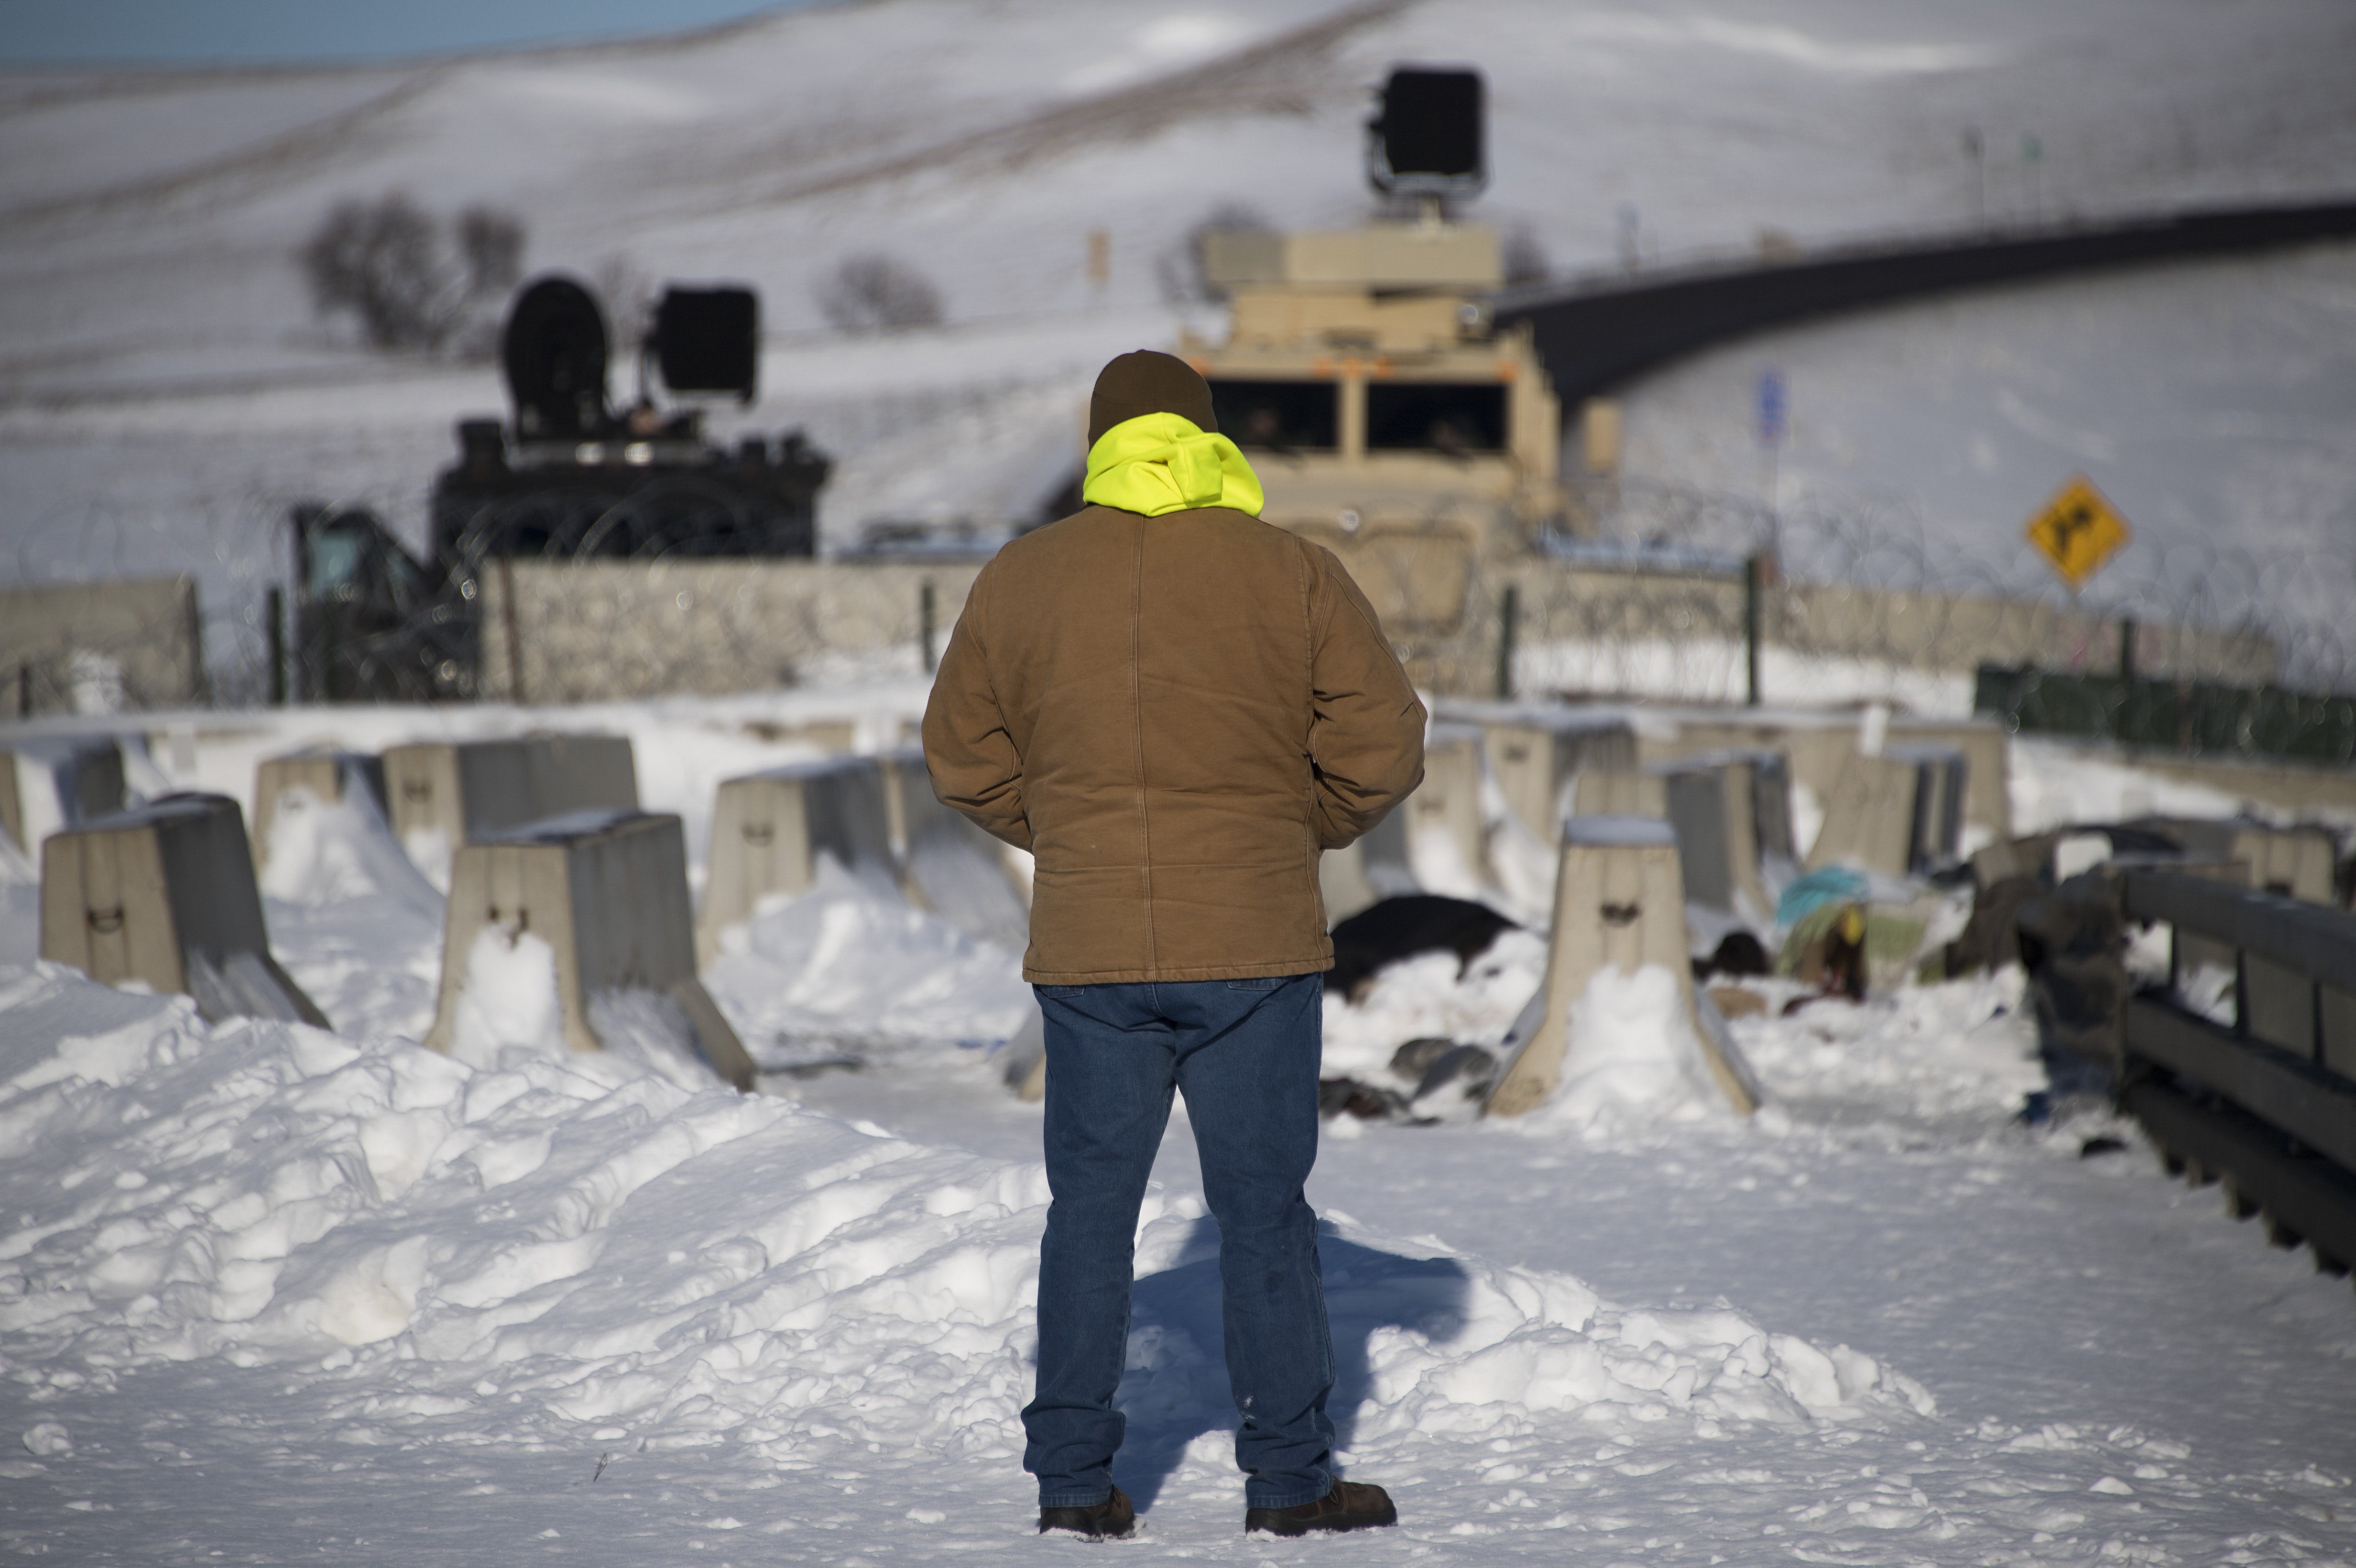 An activist stands alone in silent protest by a police barricade on a bridge near Oceti Sakowin Camp on the edge of the Standing Rock Sioux Reservation on December 4, 2016 outside Cannon Ball, North Dakota.Native Americans and activists from around the country gather at the camp trying to halt the construction of the Dakota Access Pipeline. / AFP / JIM WATSON (Photo credit should read JIM WATSON/AFP/Getty Images)